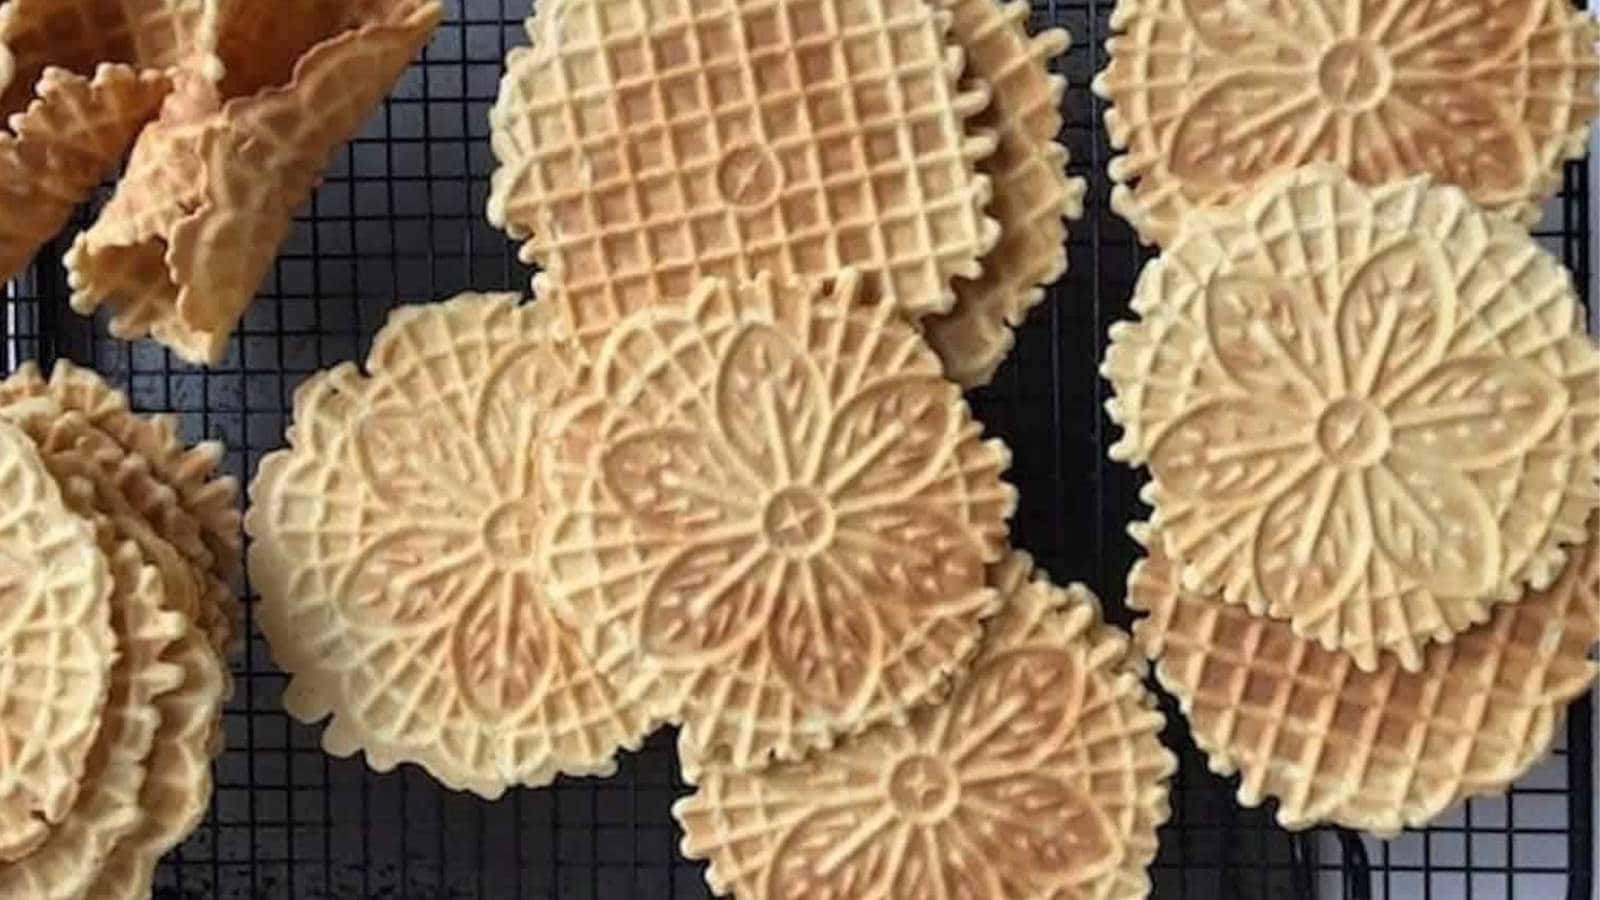 Pizzelle cookie recipe by Keeping It Simple.